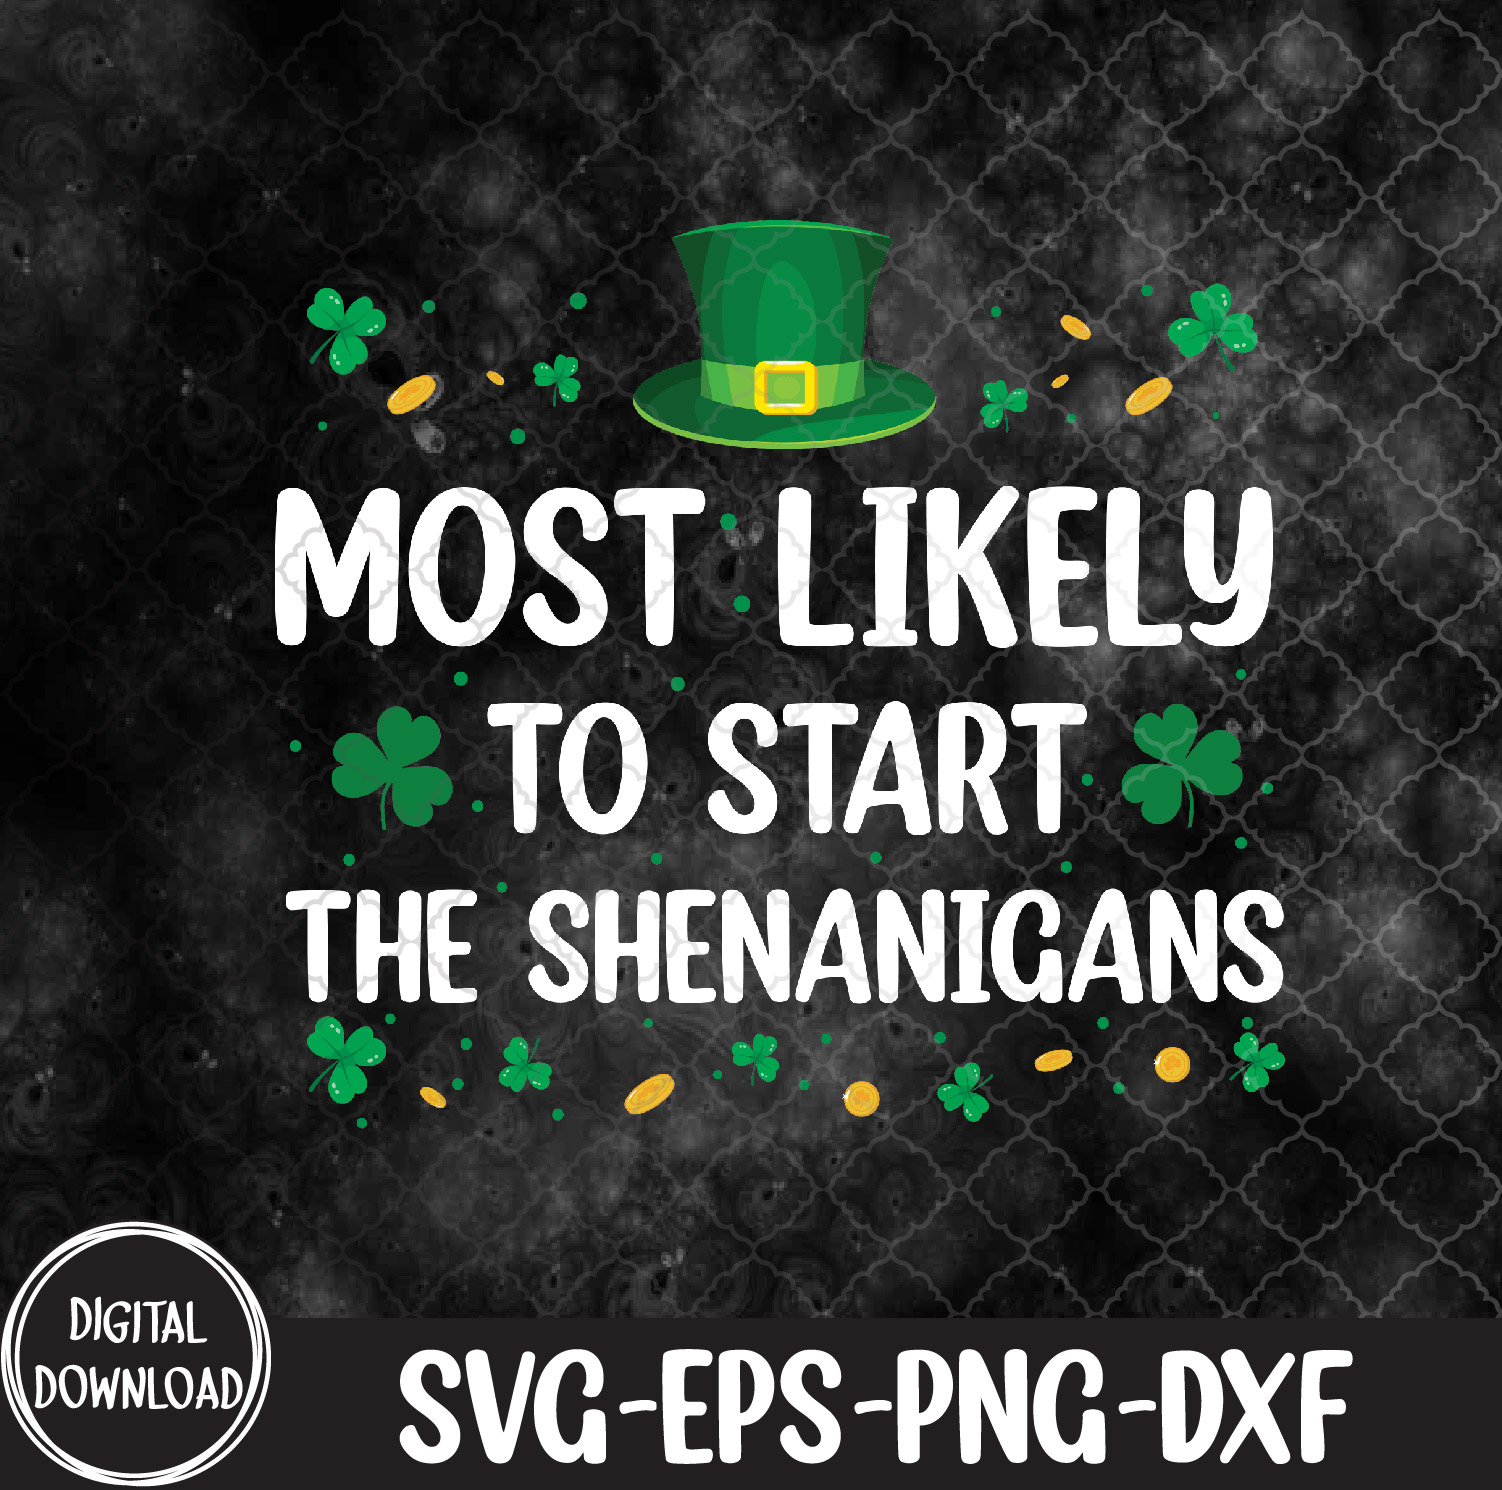 WTMNEW9file 09 23 Most Likely To Start The Shenanigans Funny St Patricks Day, St Patricks Day svg, Most Likely To svg, Svg, Eps, Png, Dxf